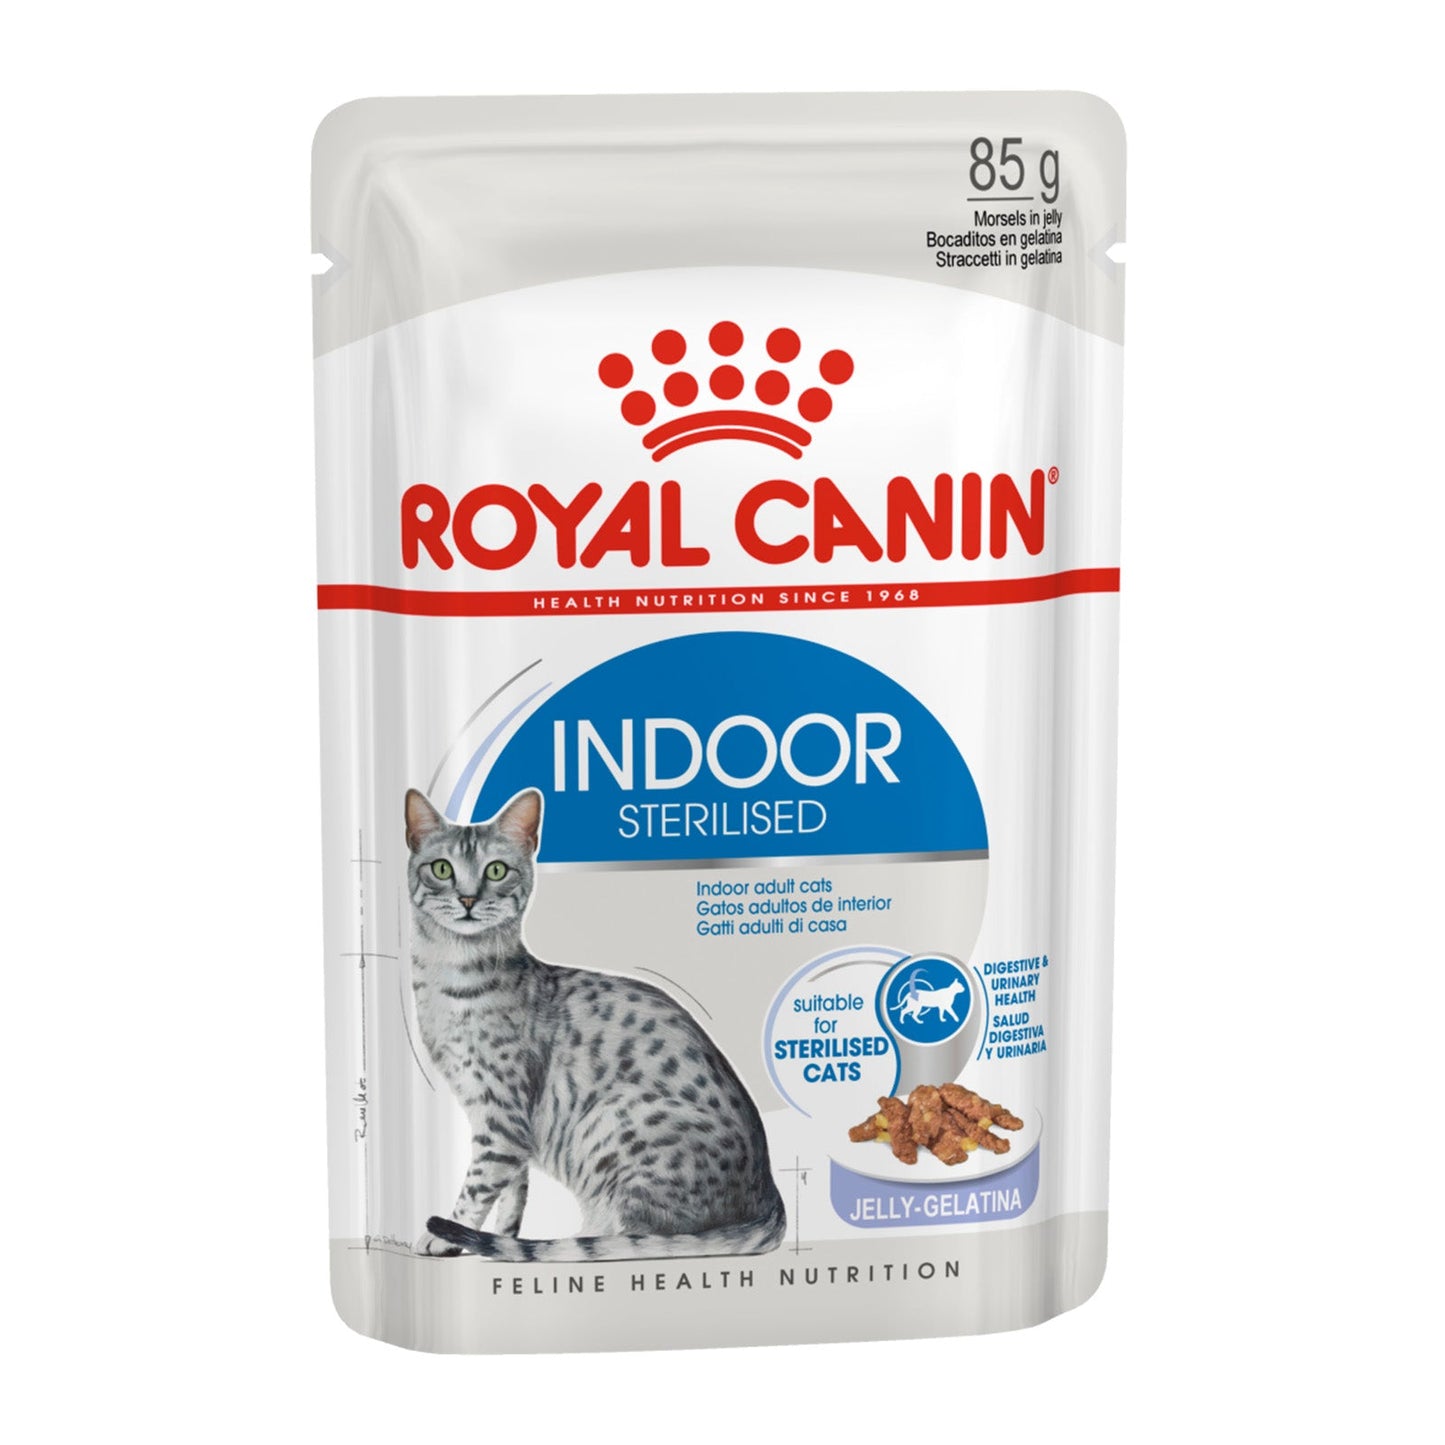 Royal Canin Cat Wet Food Pouch Indoor Sterilised Jelly 85g - Woonona Petfood & Produce